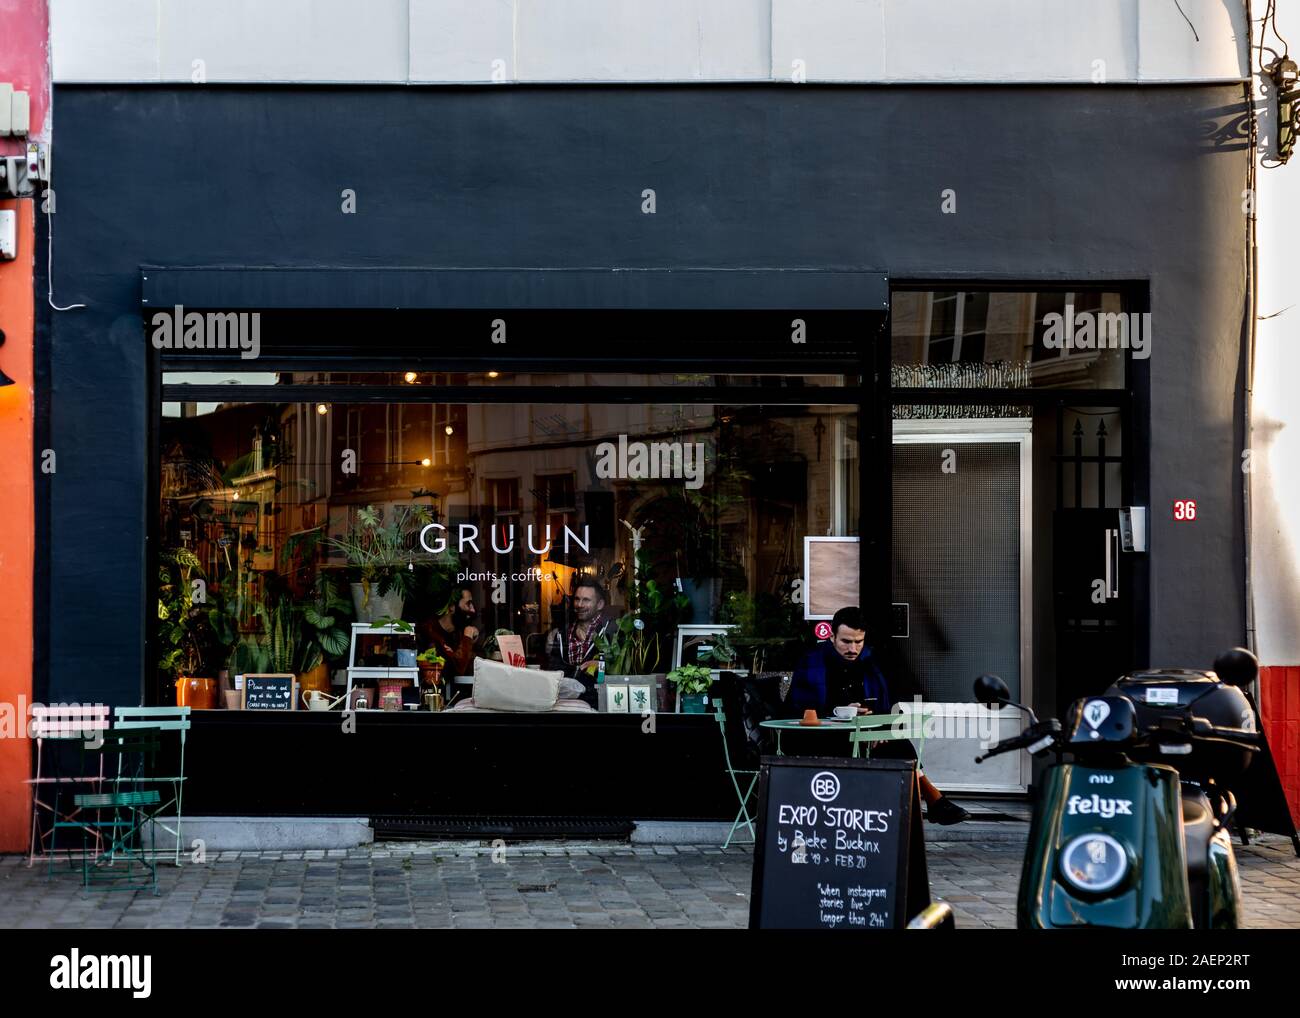 GRUUN coffee bar and plant shop, Brussels, Belgium Stock Photo